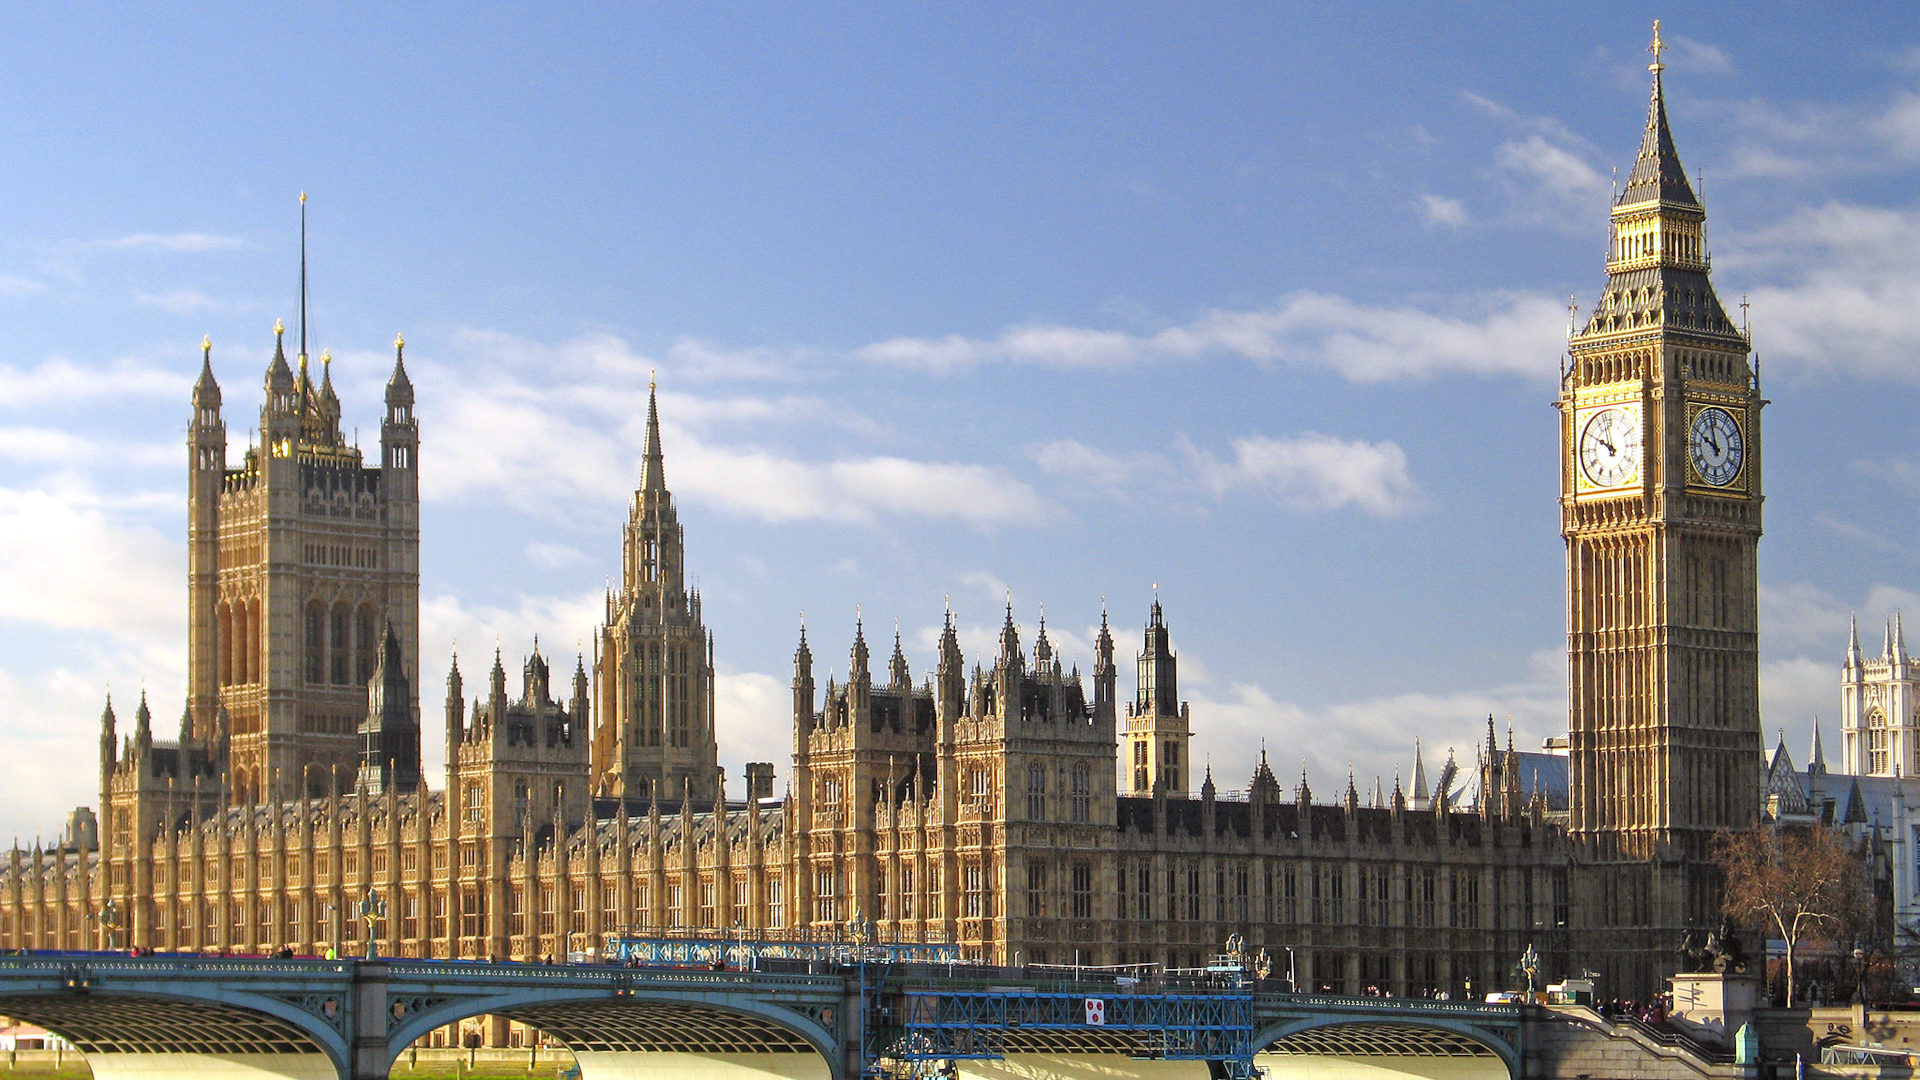 man made, big ben, architecture, building, london, palace of westminster, united kingdom, monuments